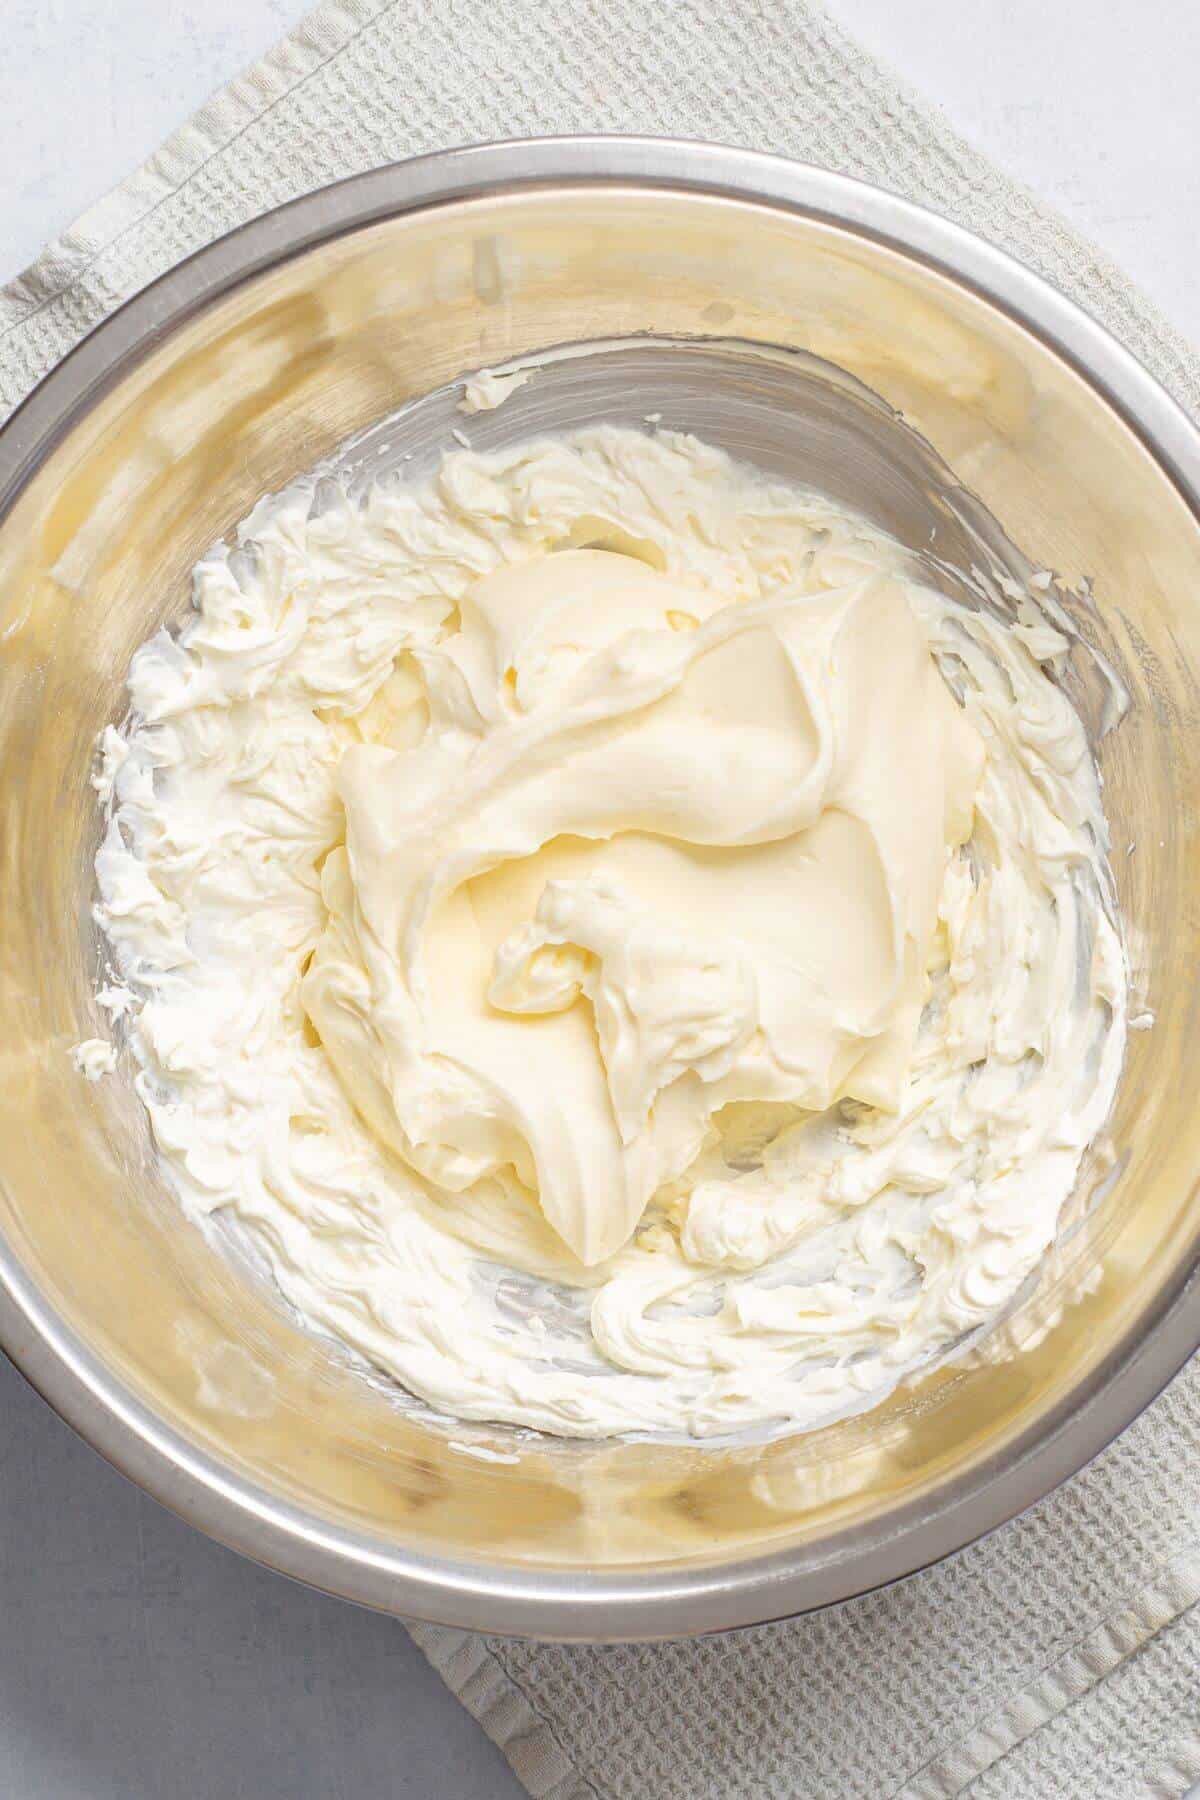 Whipped cream added to mixing bowl.